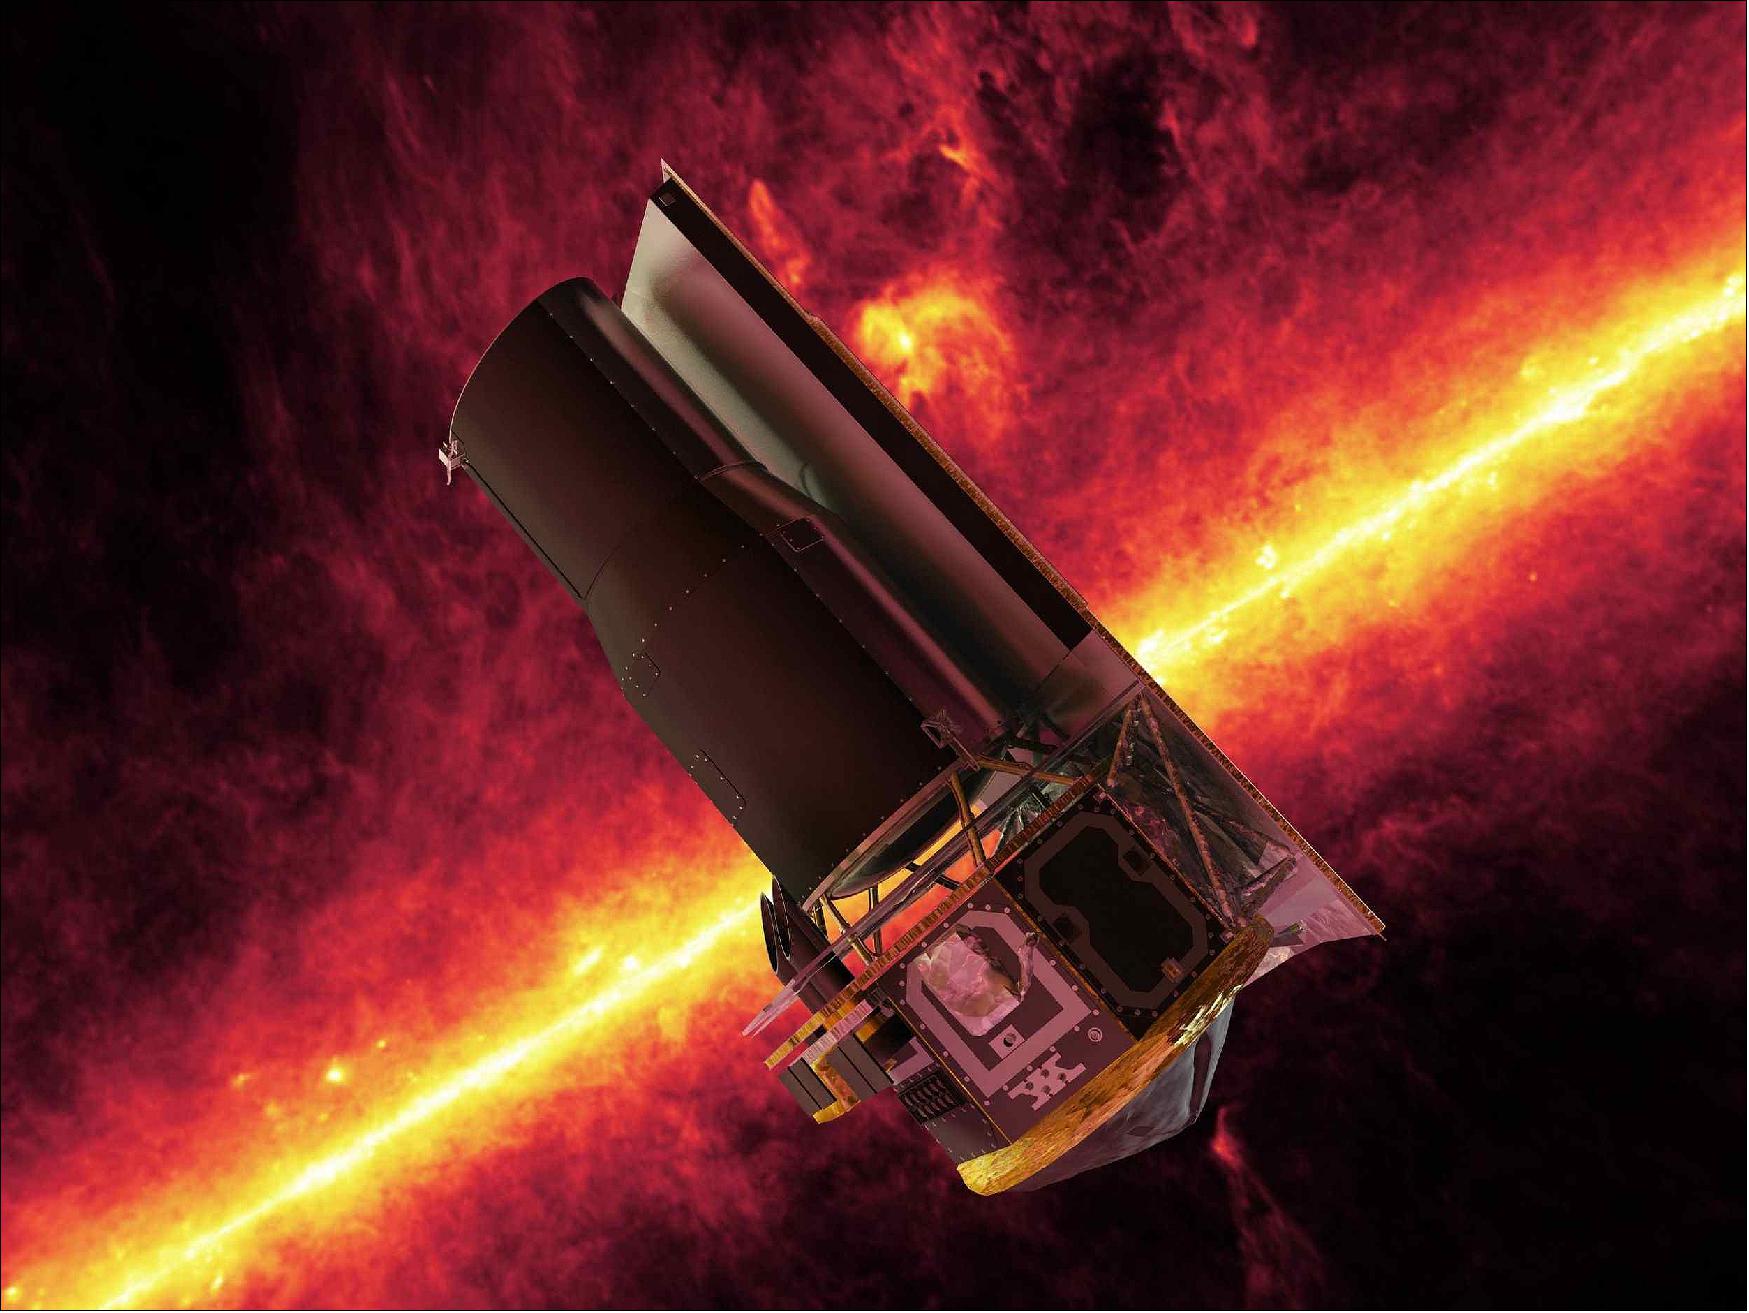 Figure 2: The Spitzer Space Telescope whizzes in front of a brilliant, infrared view of the Milky Way galaxy's plane in this artistic depiction (image credit: NASA/JPL- Caltech)